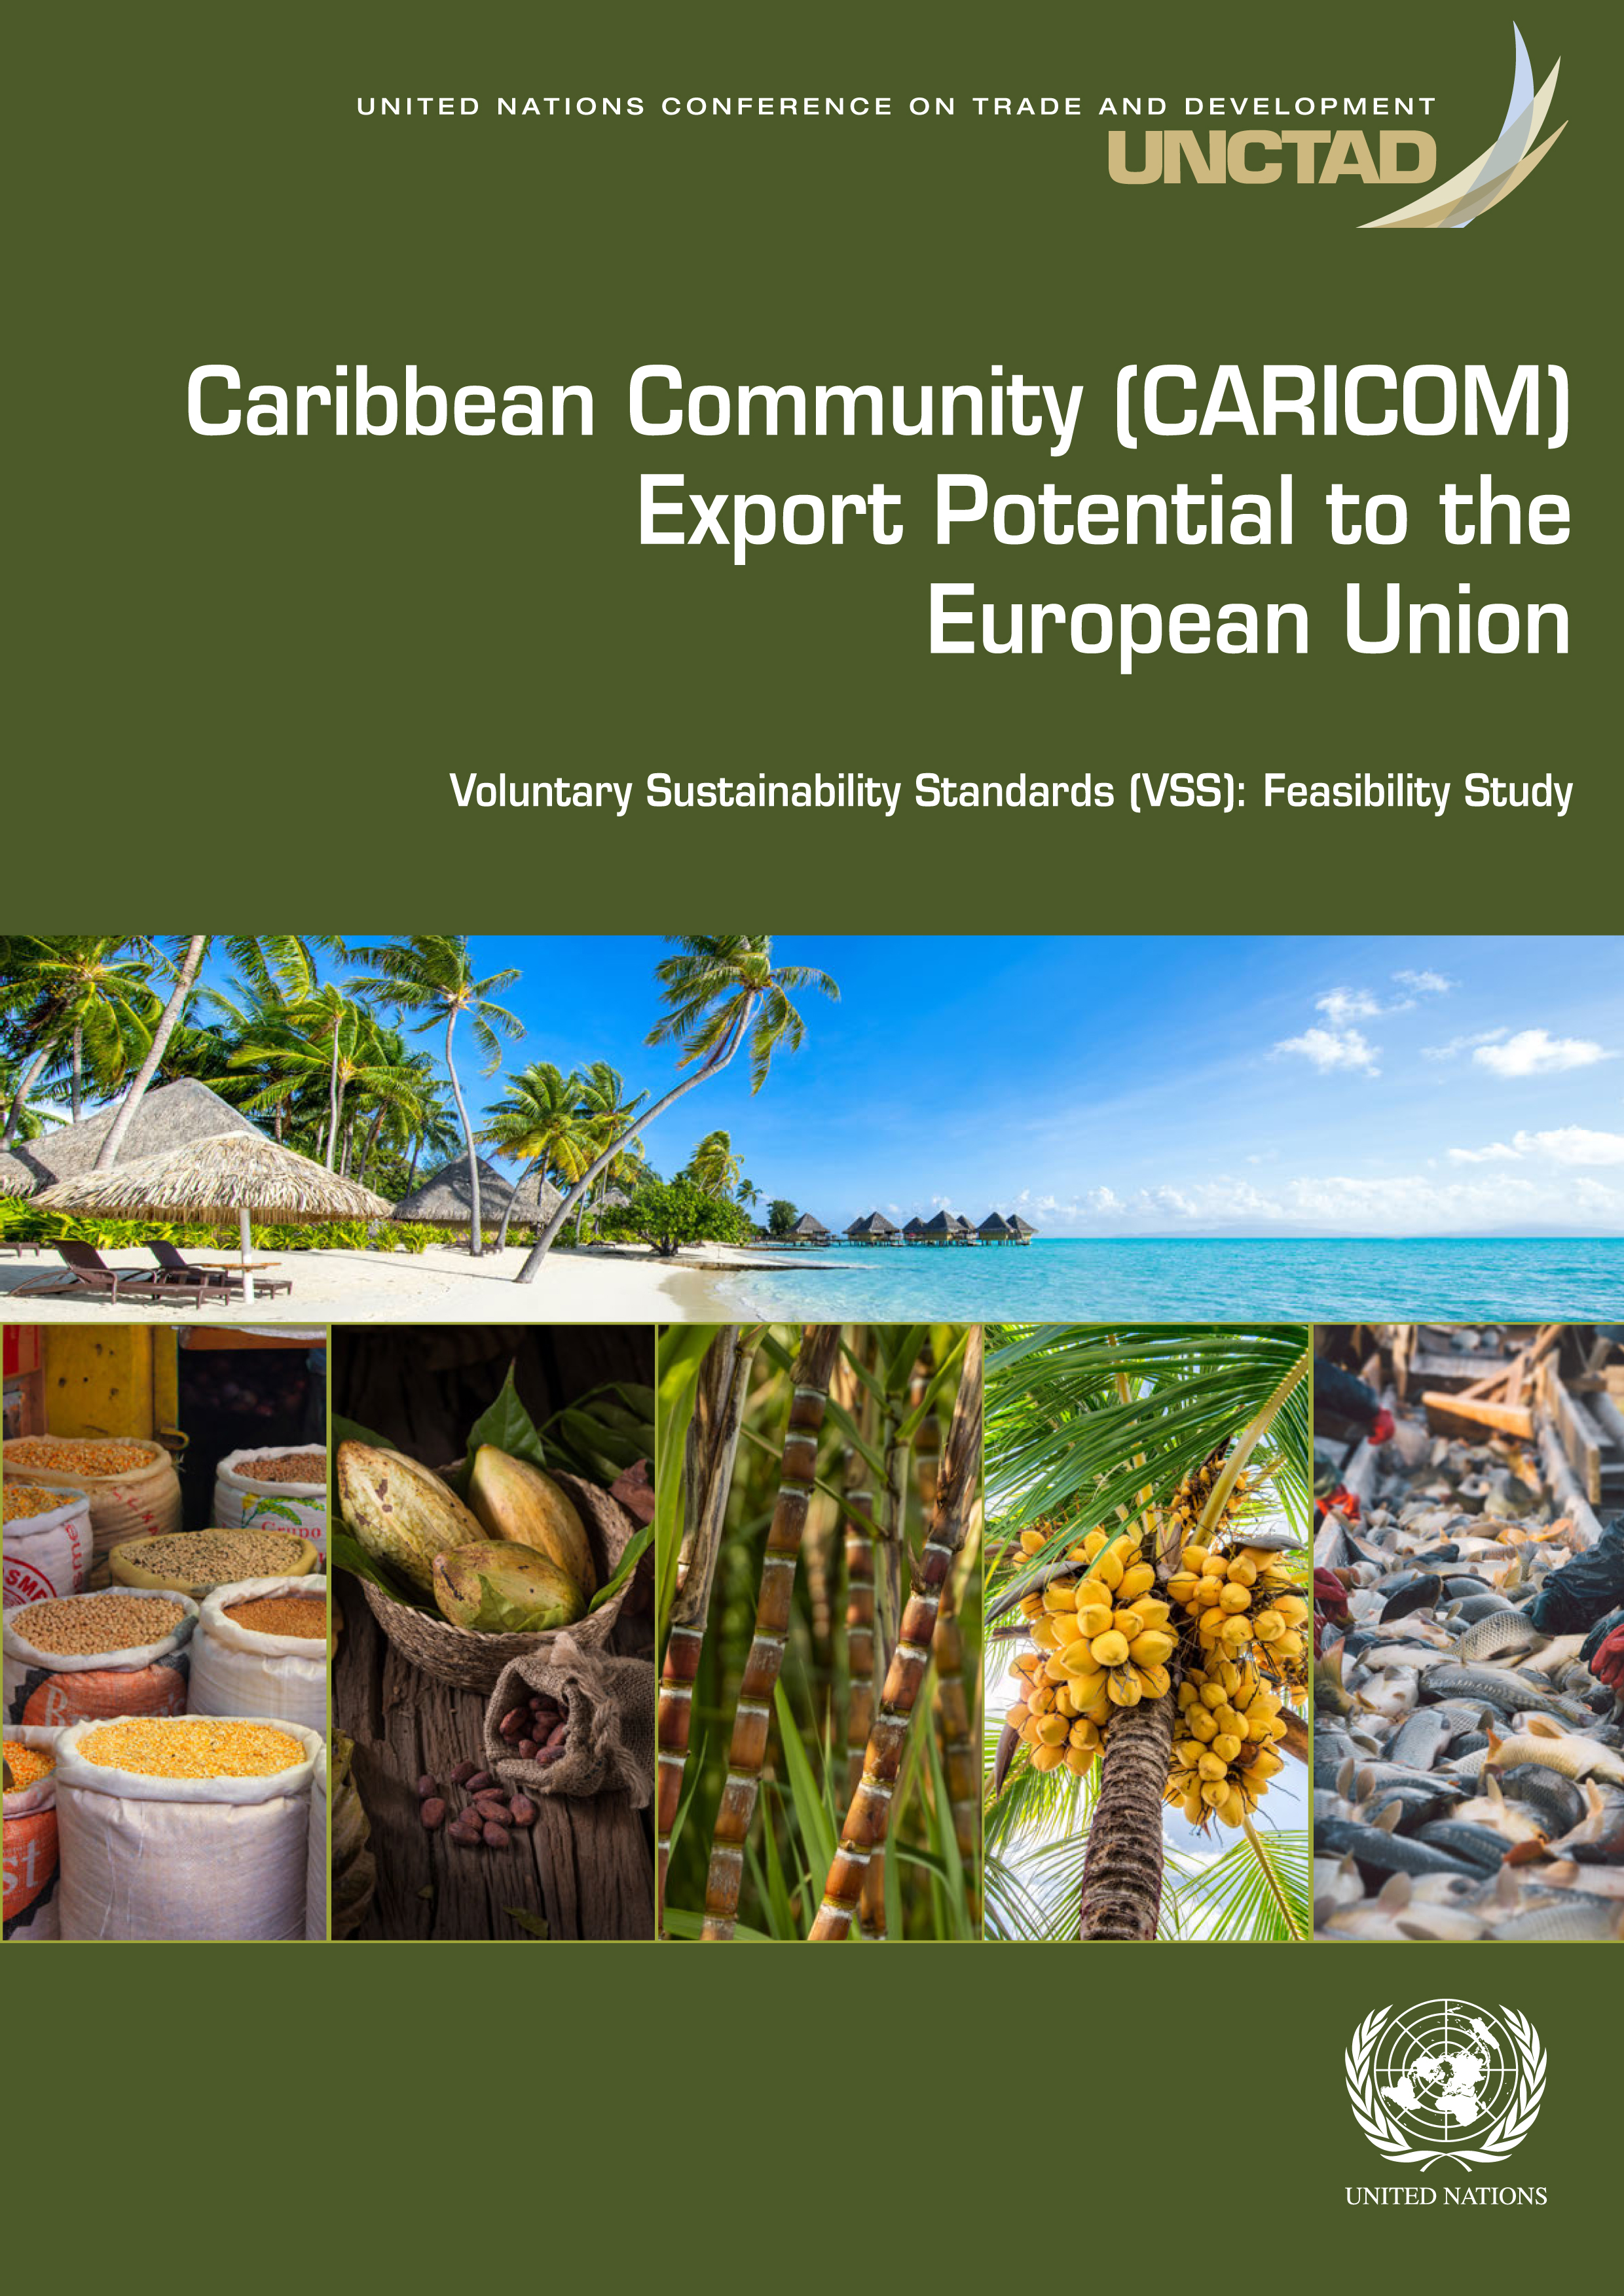 image of Caribbean Community (CARICOM) Export Potential to the European Union